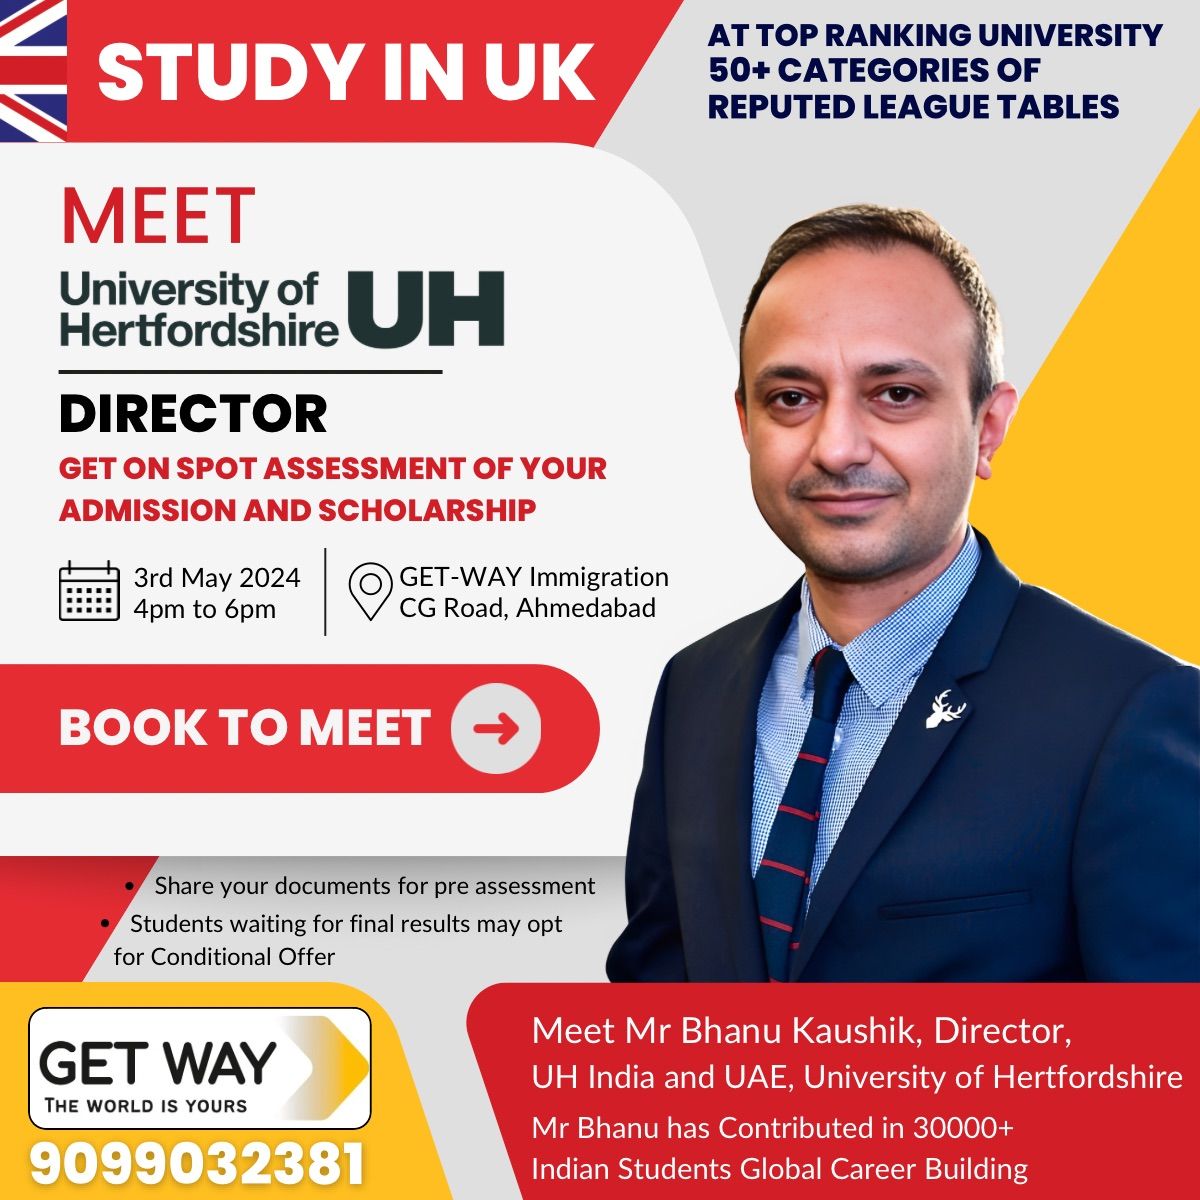 Meet University Representative for Admission Assessment and Scholarship Eligibility